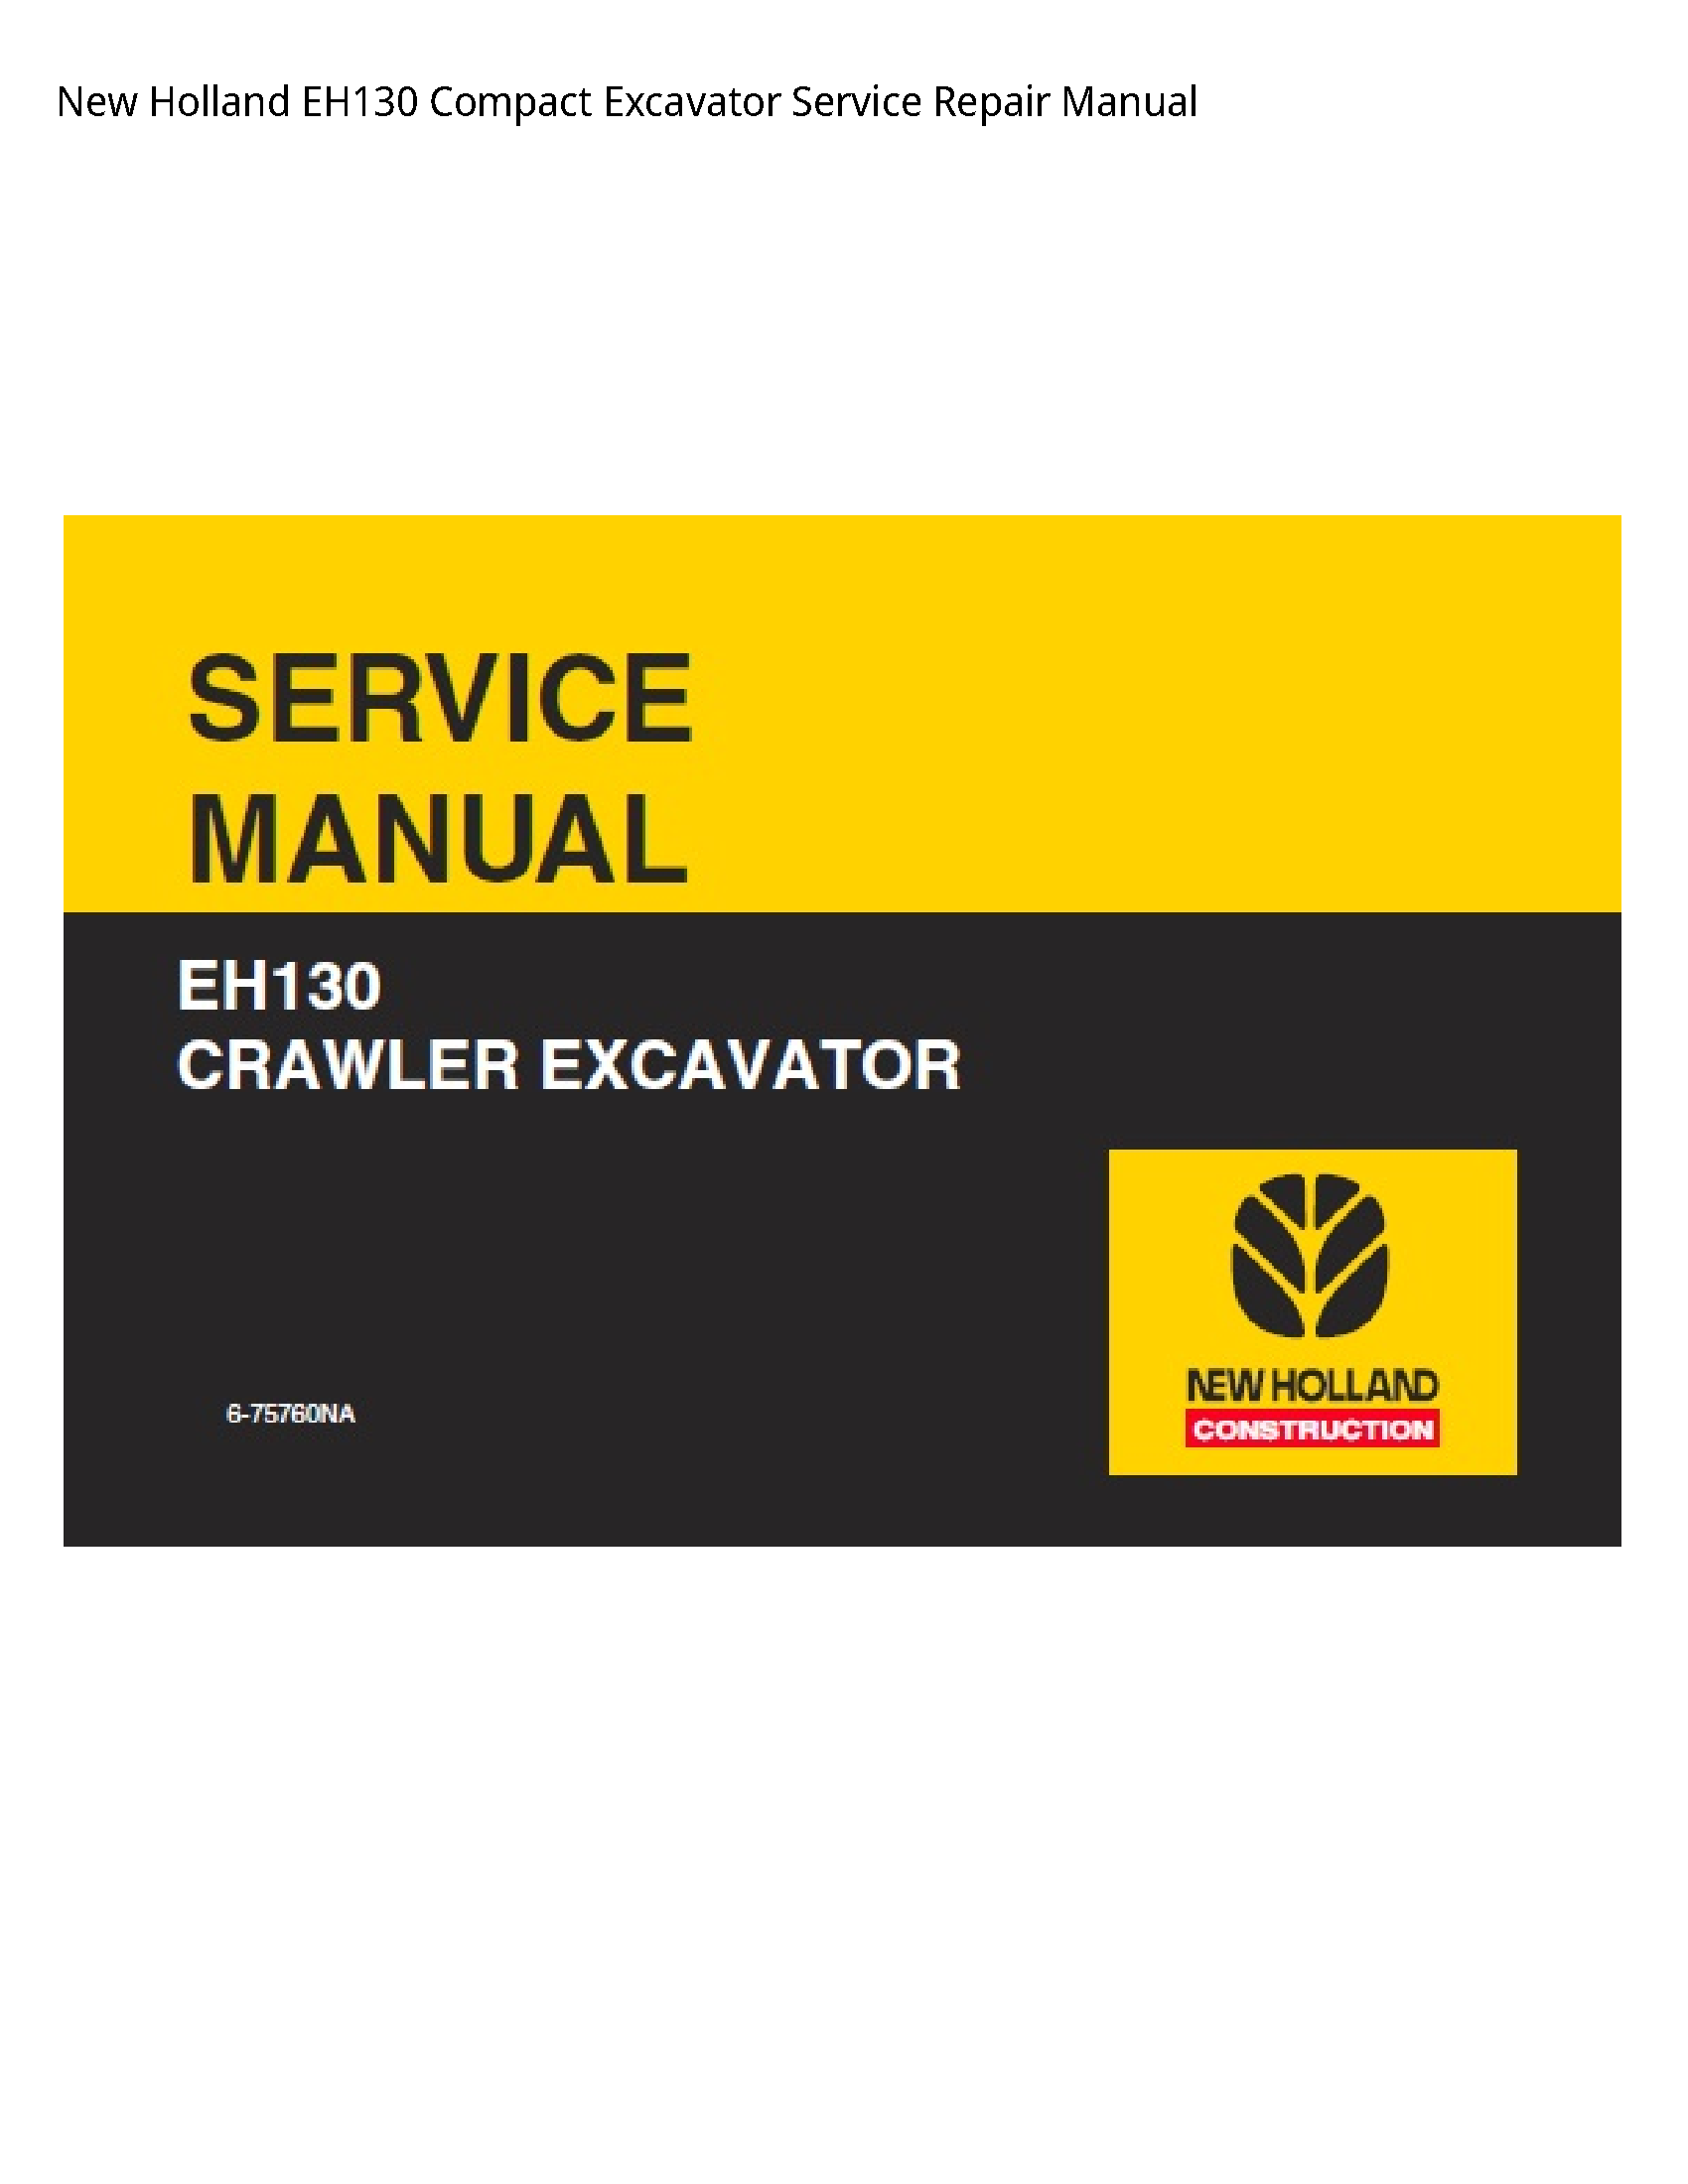 New Holland EH130 Compact Excavator manual